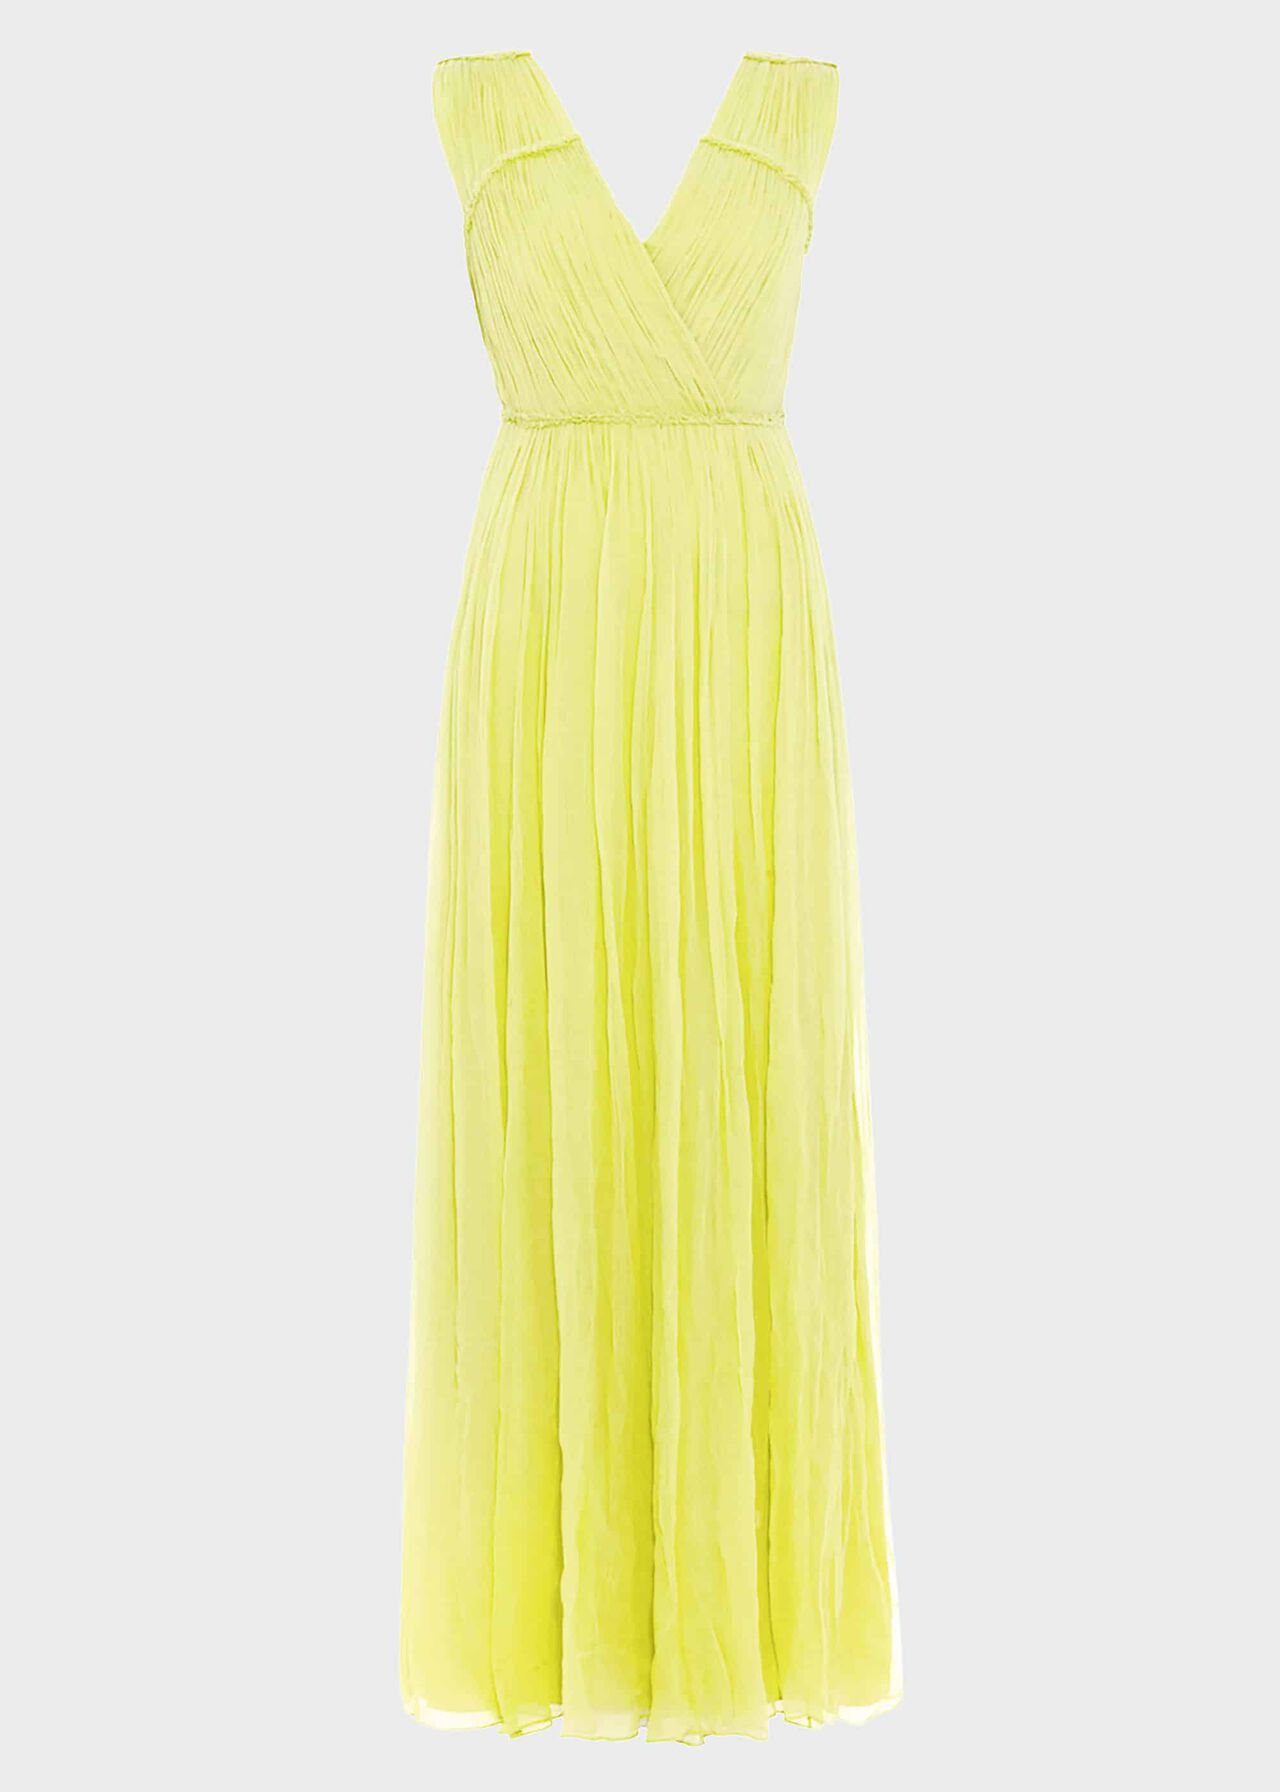 Marion Crinkle Maxi Dress